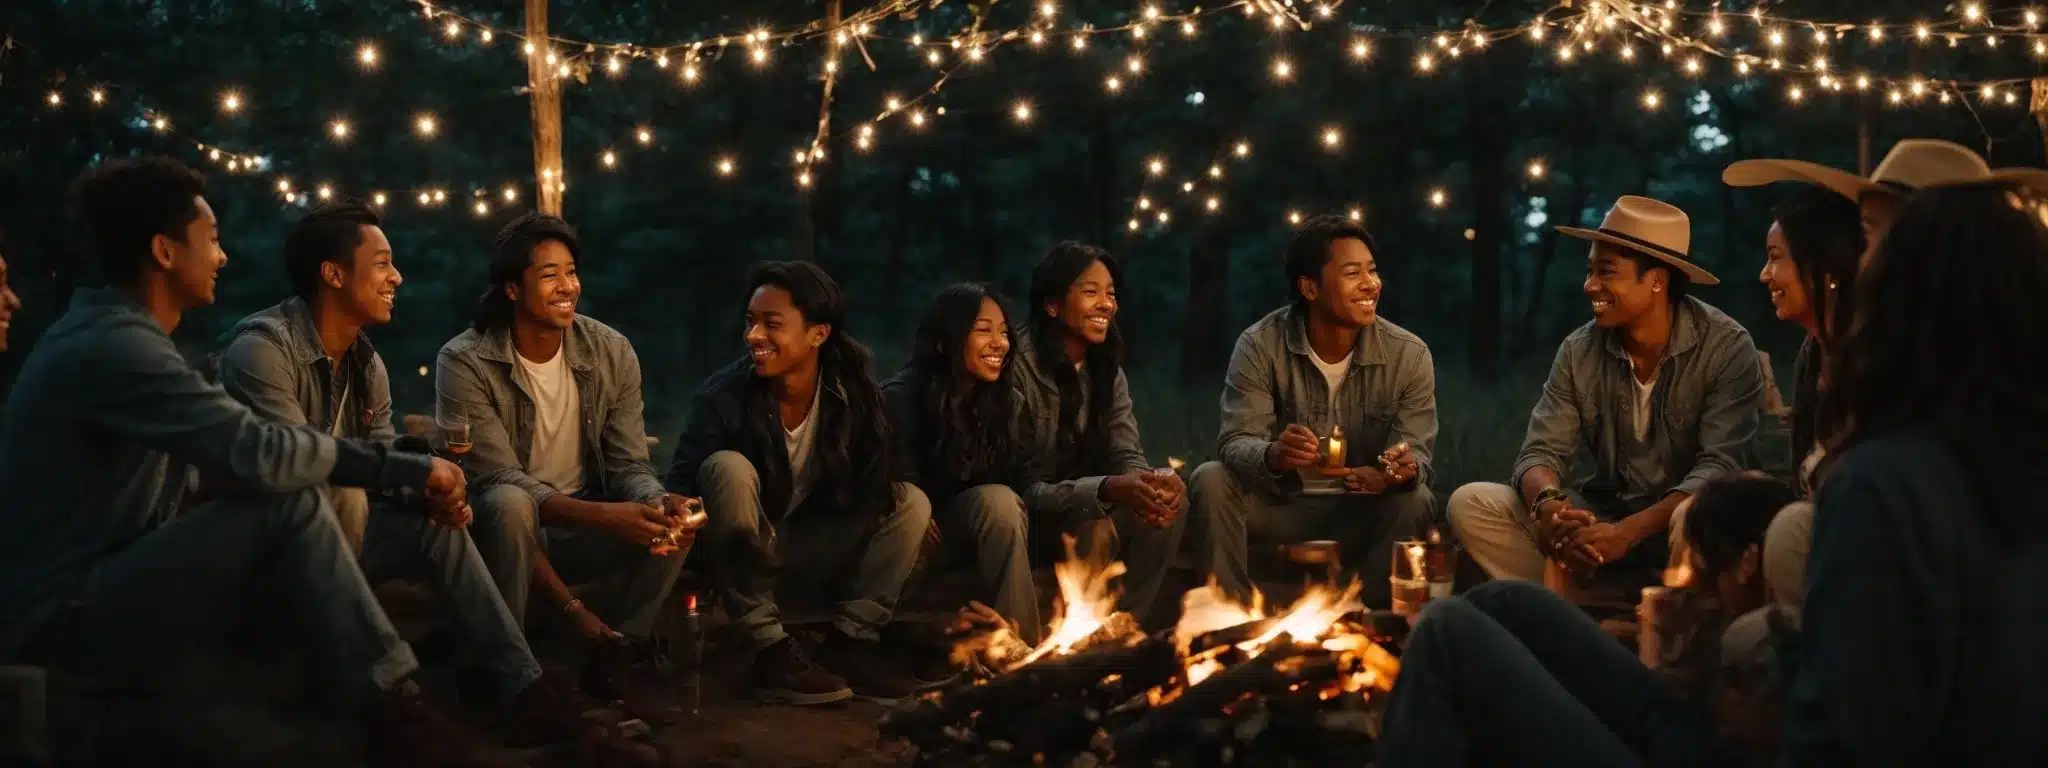 A Diverse Group Of Smiling People Gathered Around A Campfire, Engaging In Animated Conversation Under A Canopy Of Twinkling Lights.